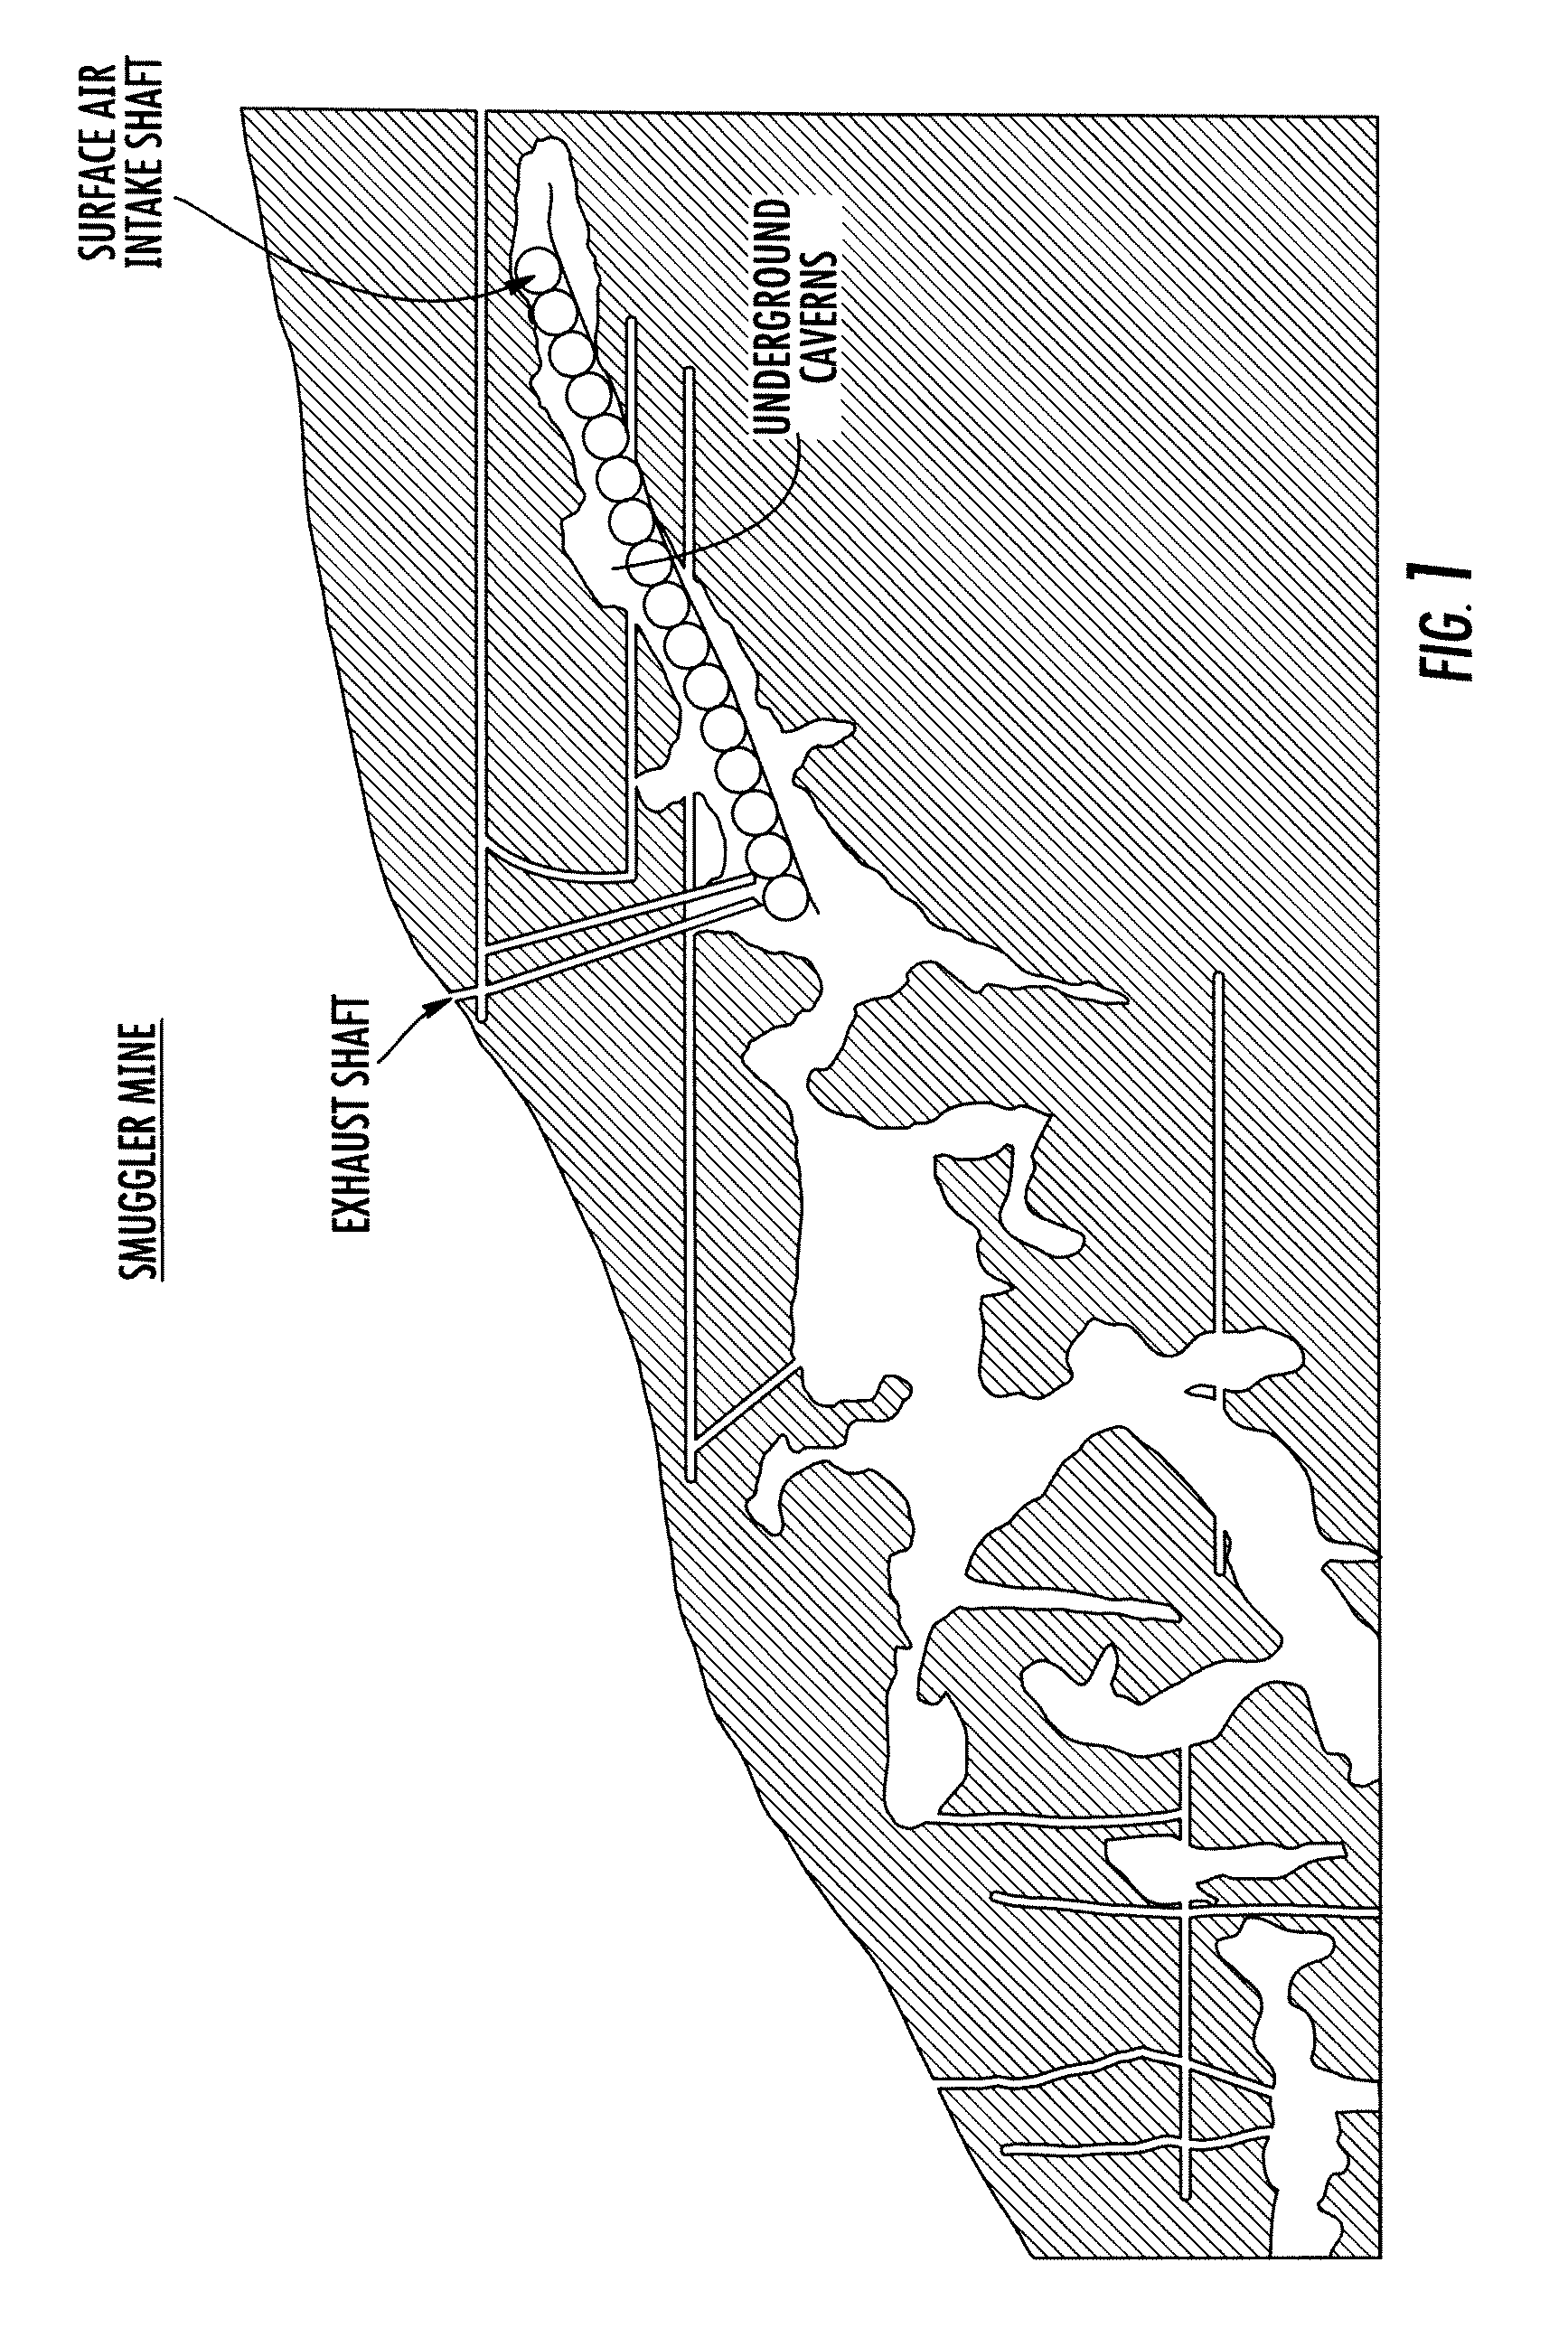 Geothermal power generation system and method for adapting to mine shafts